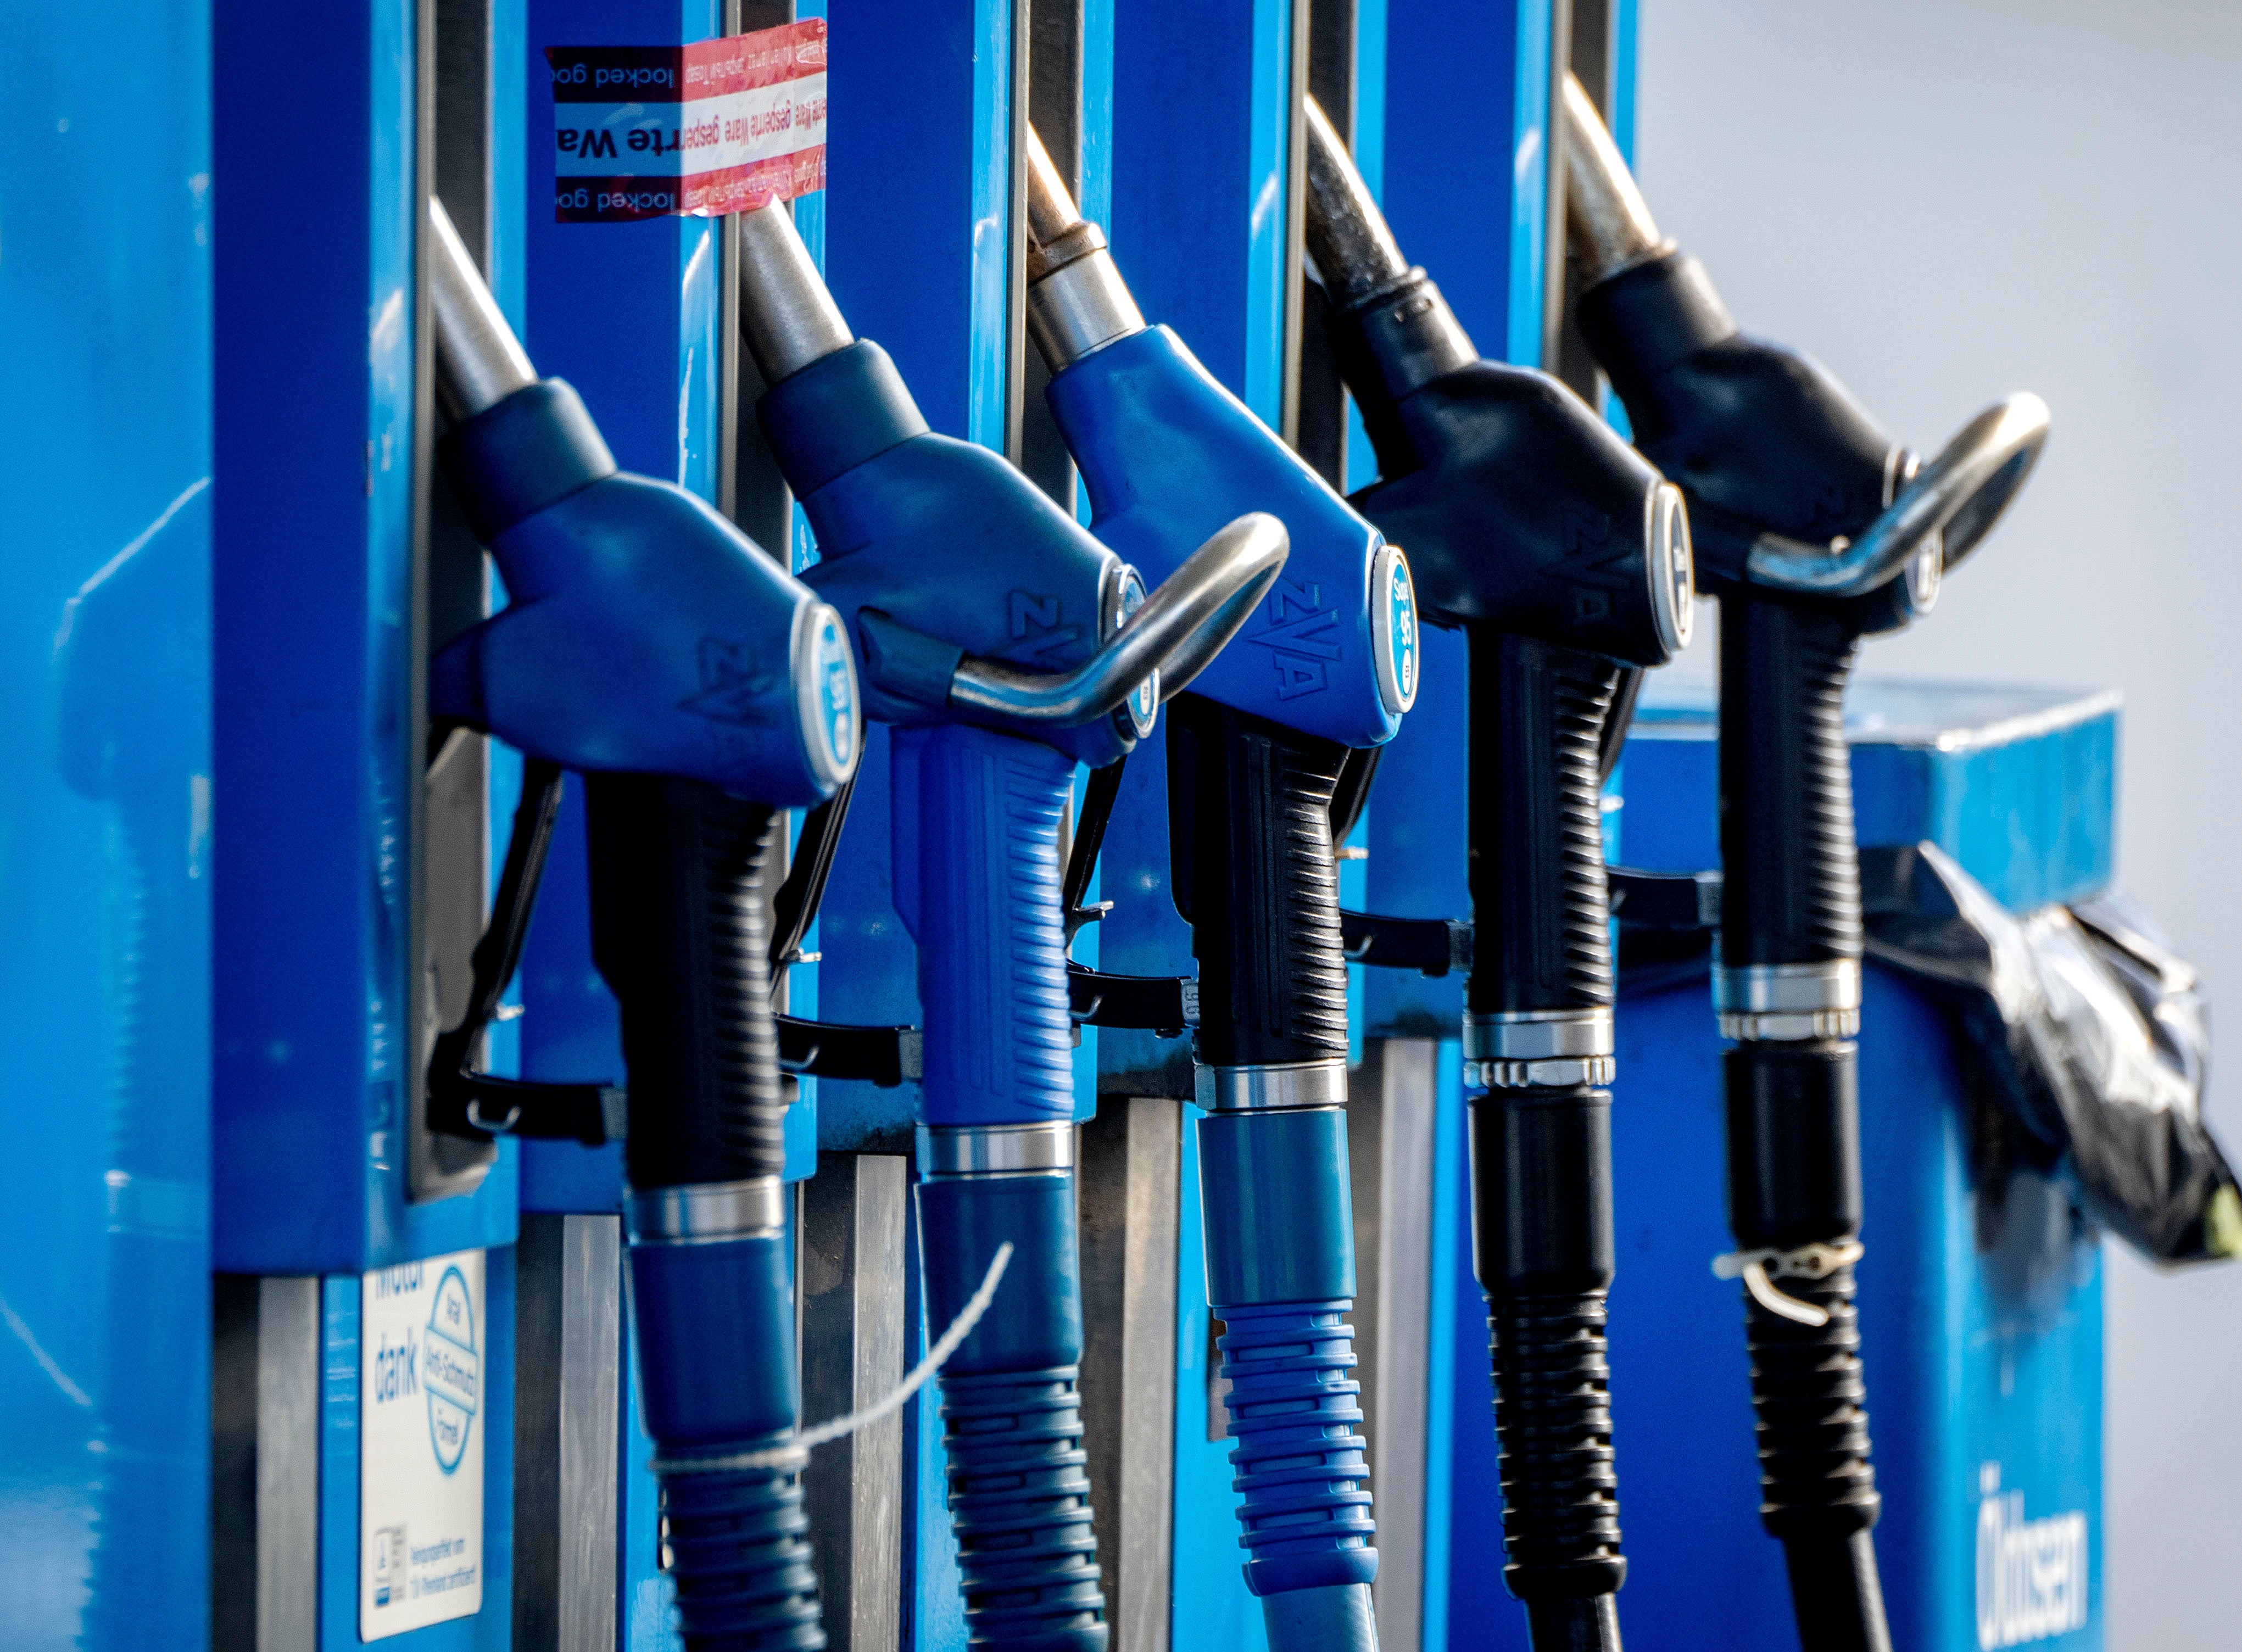 The impact at the pumps will be felt sooner rather than later given the way forecourt prices move much faster when oil prices are trending higher